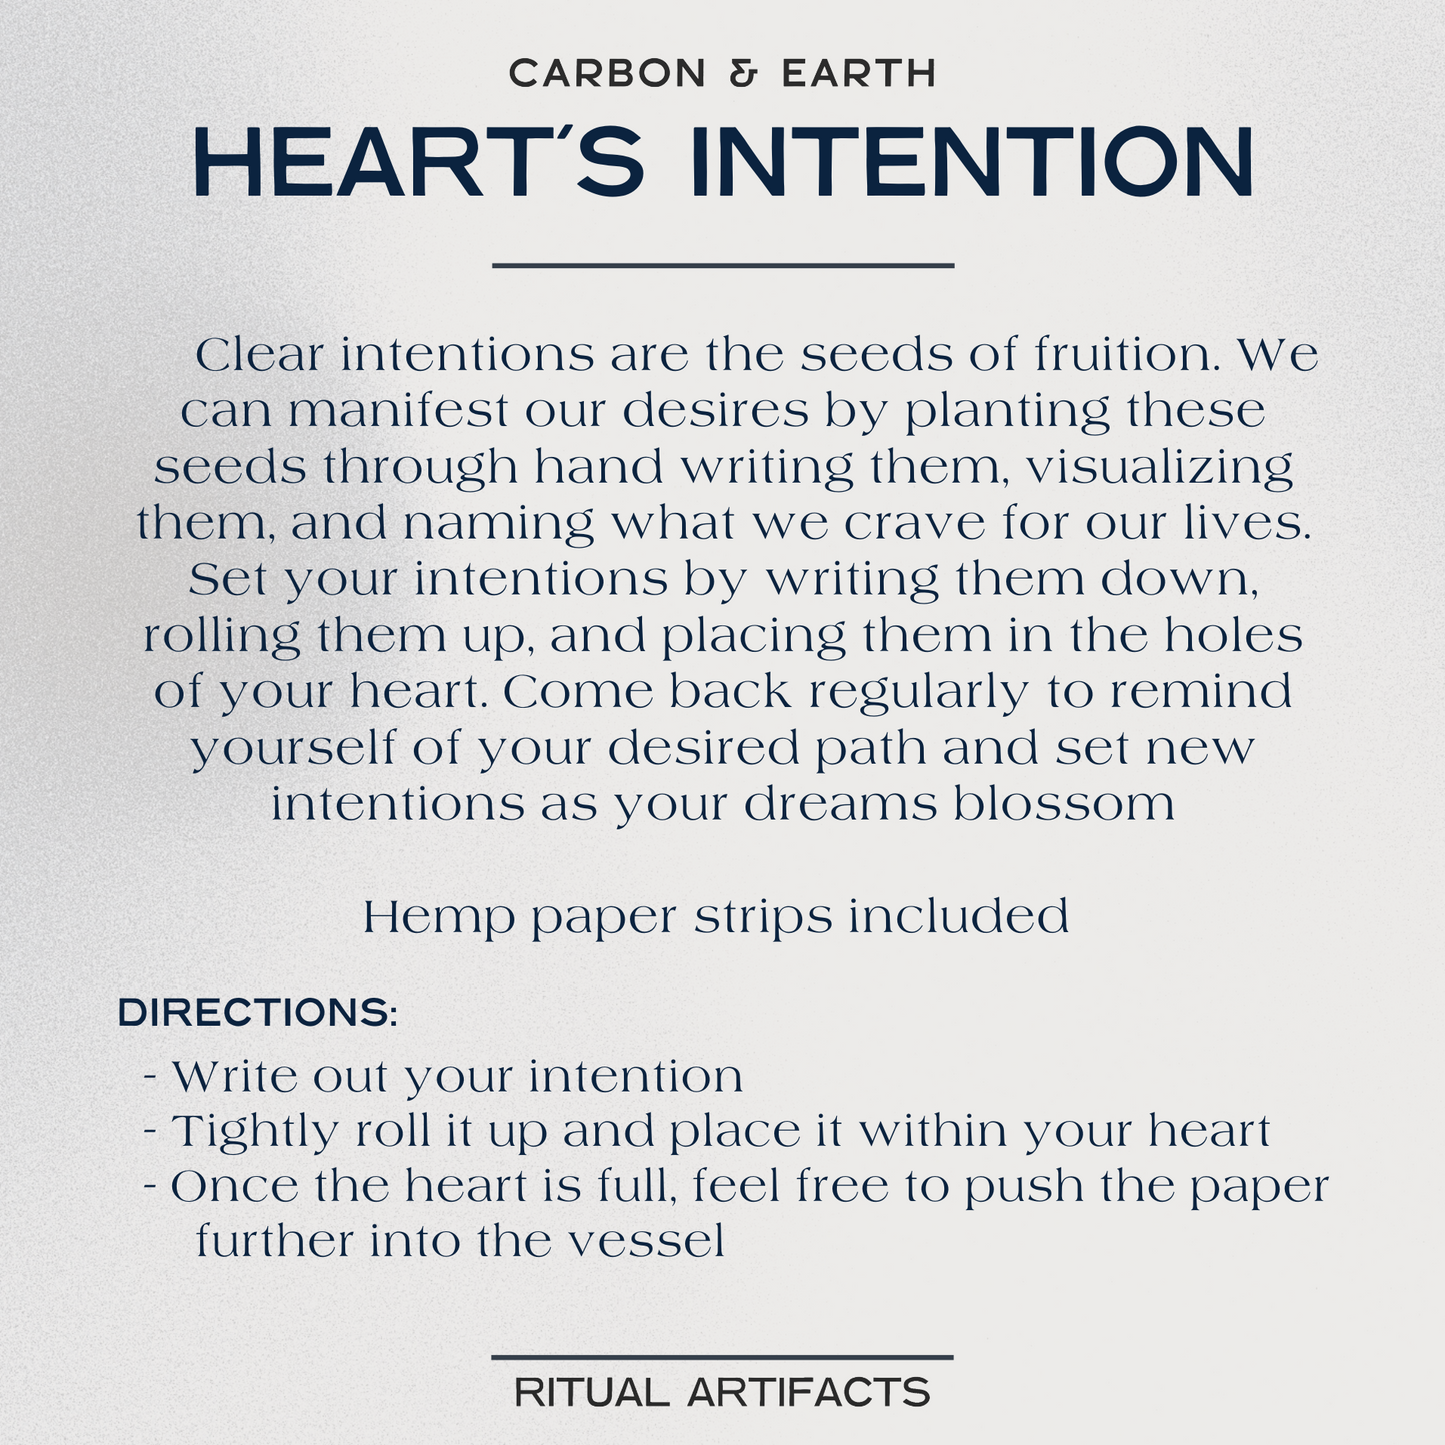 Heart's Intentions